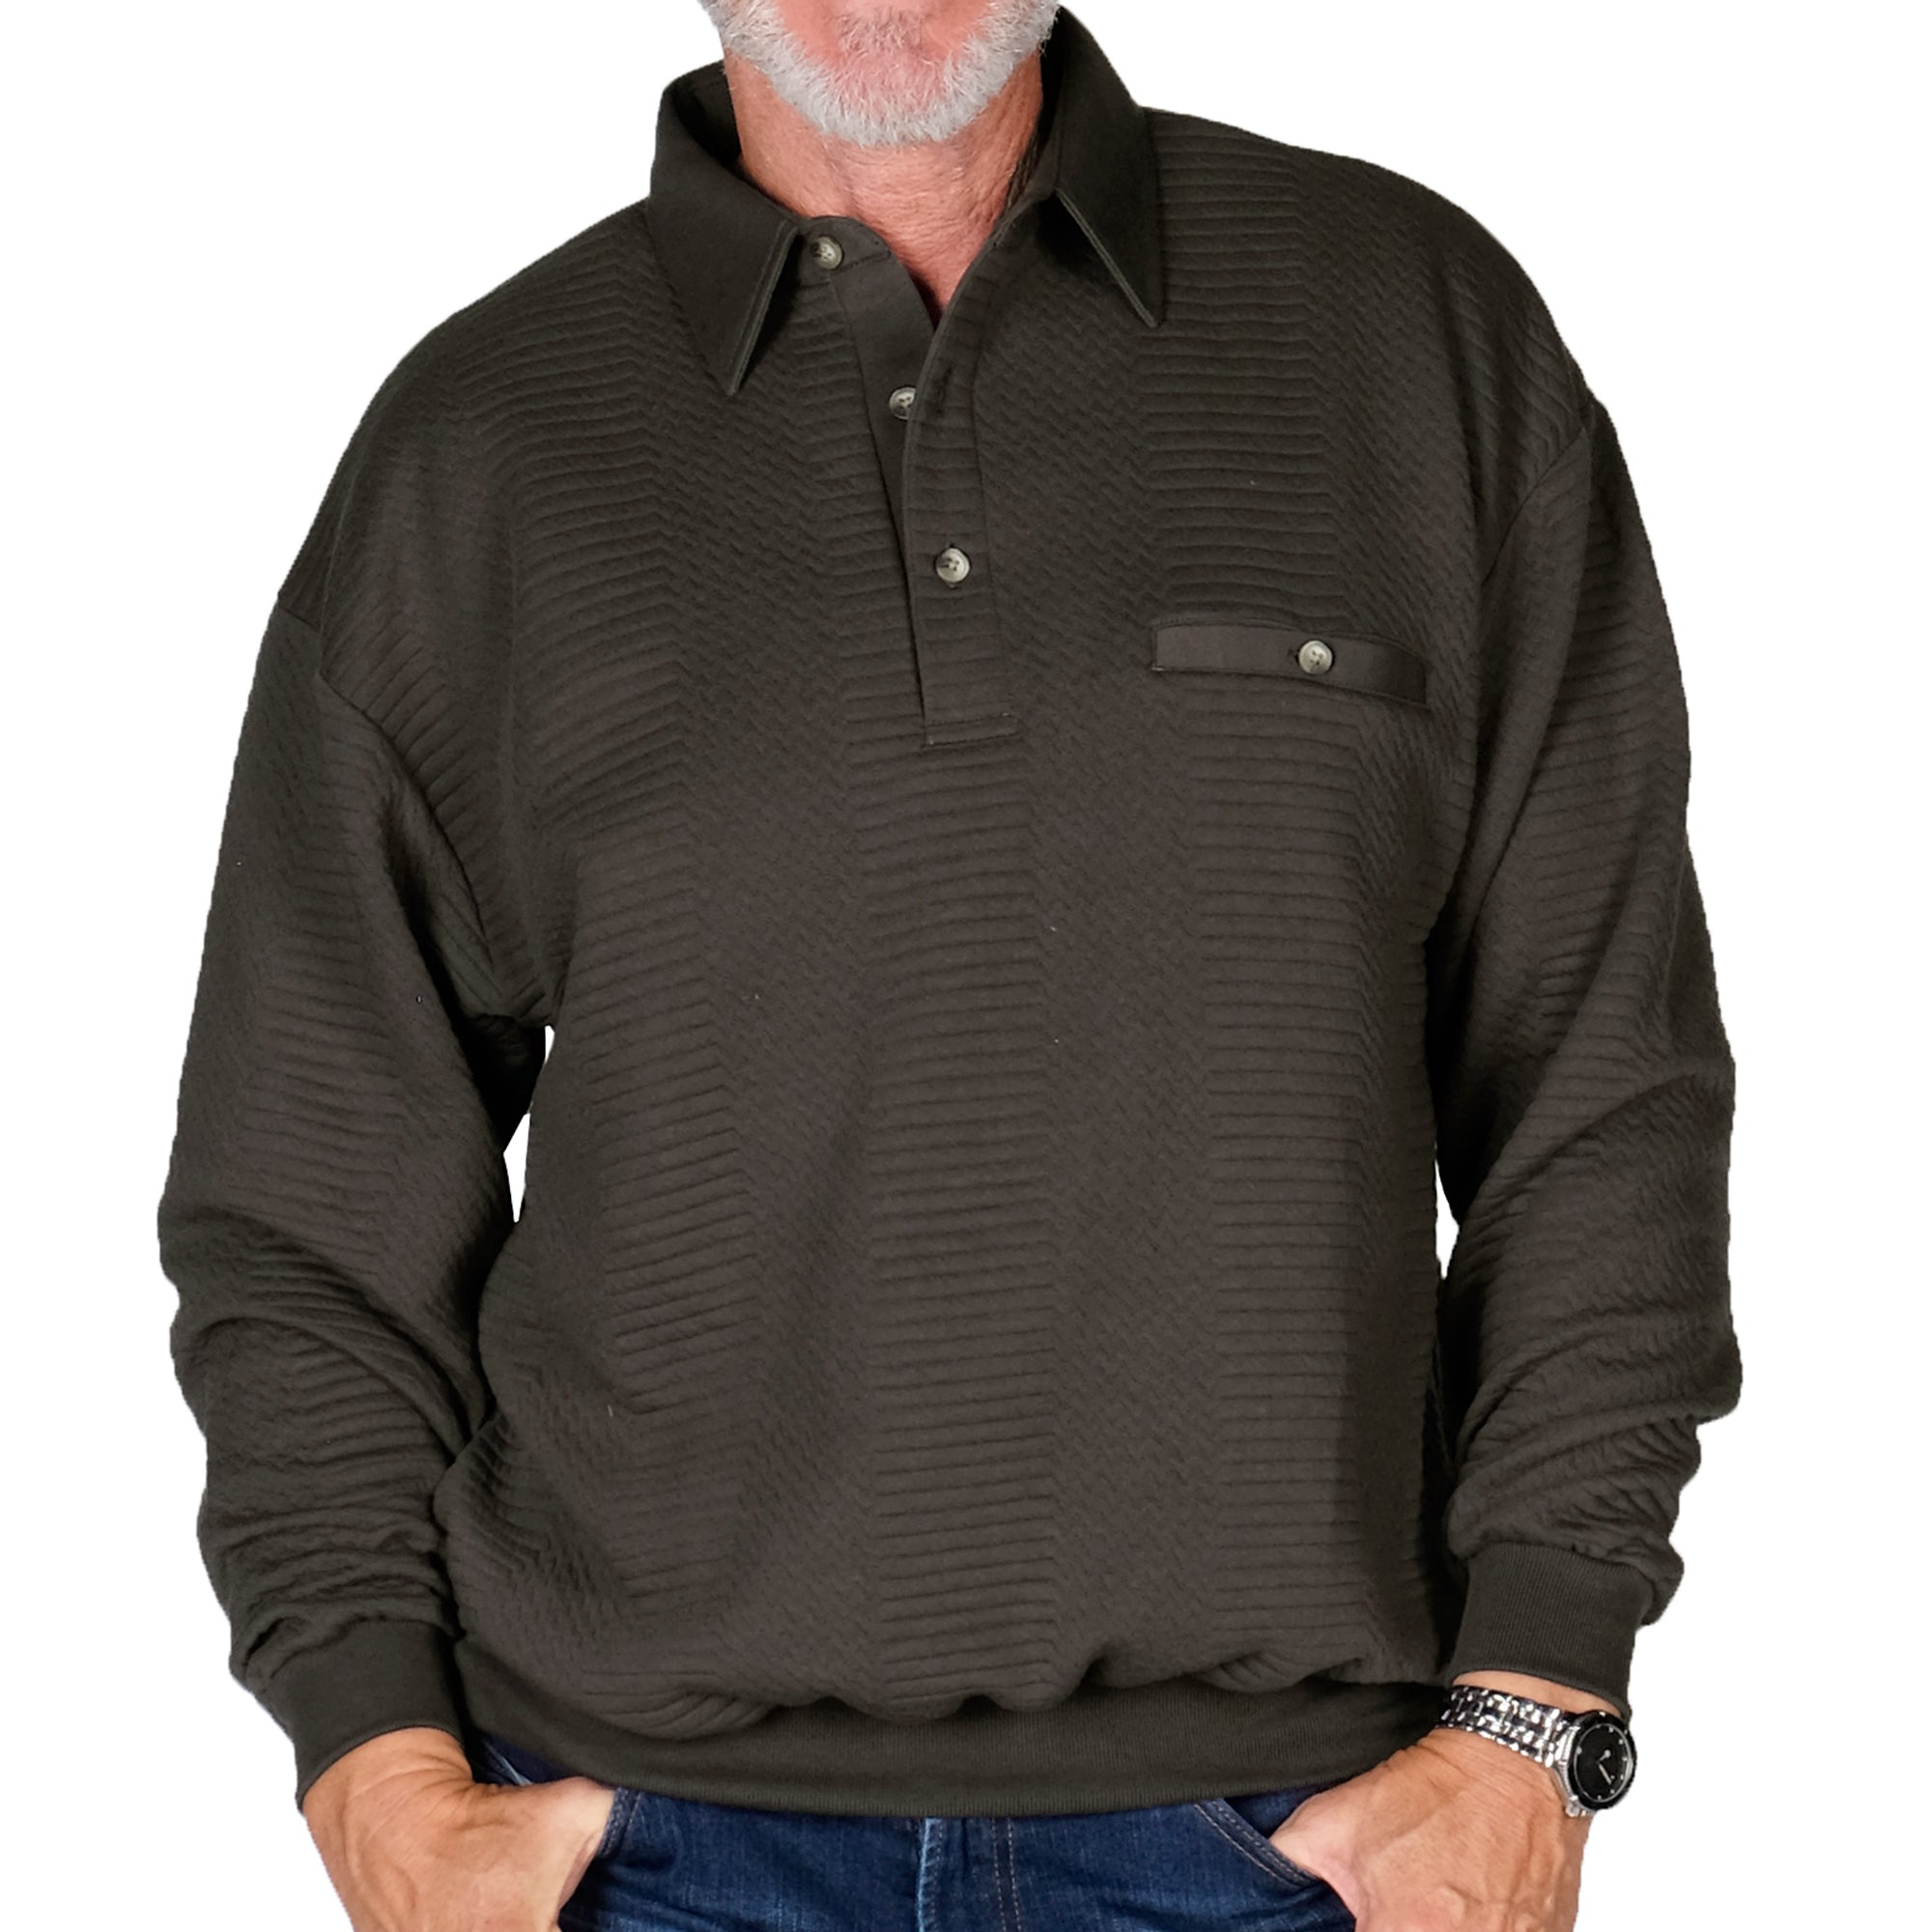 LD Sport Solid Textured Long Sleeve Banded Bottom Shirt - 6094-950 - Charcoal